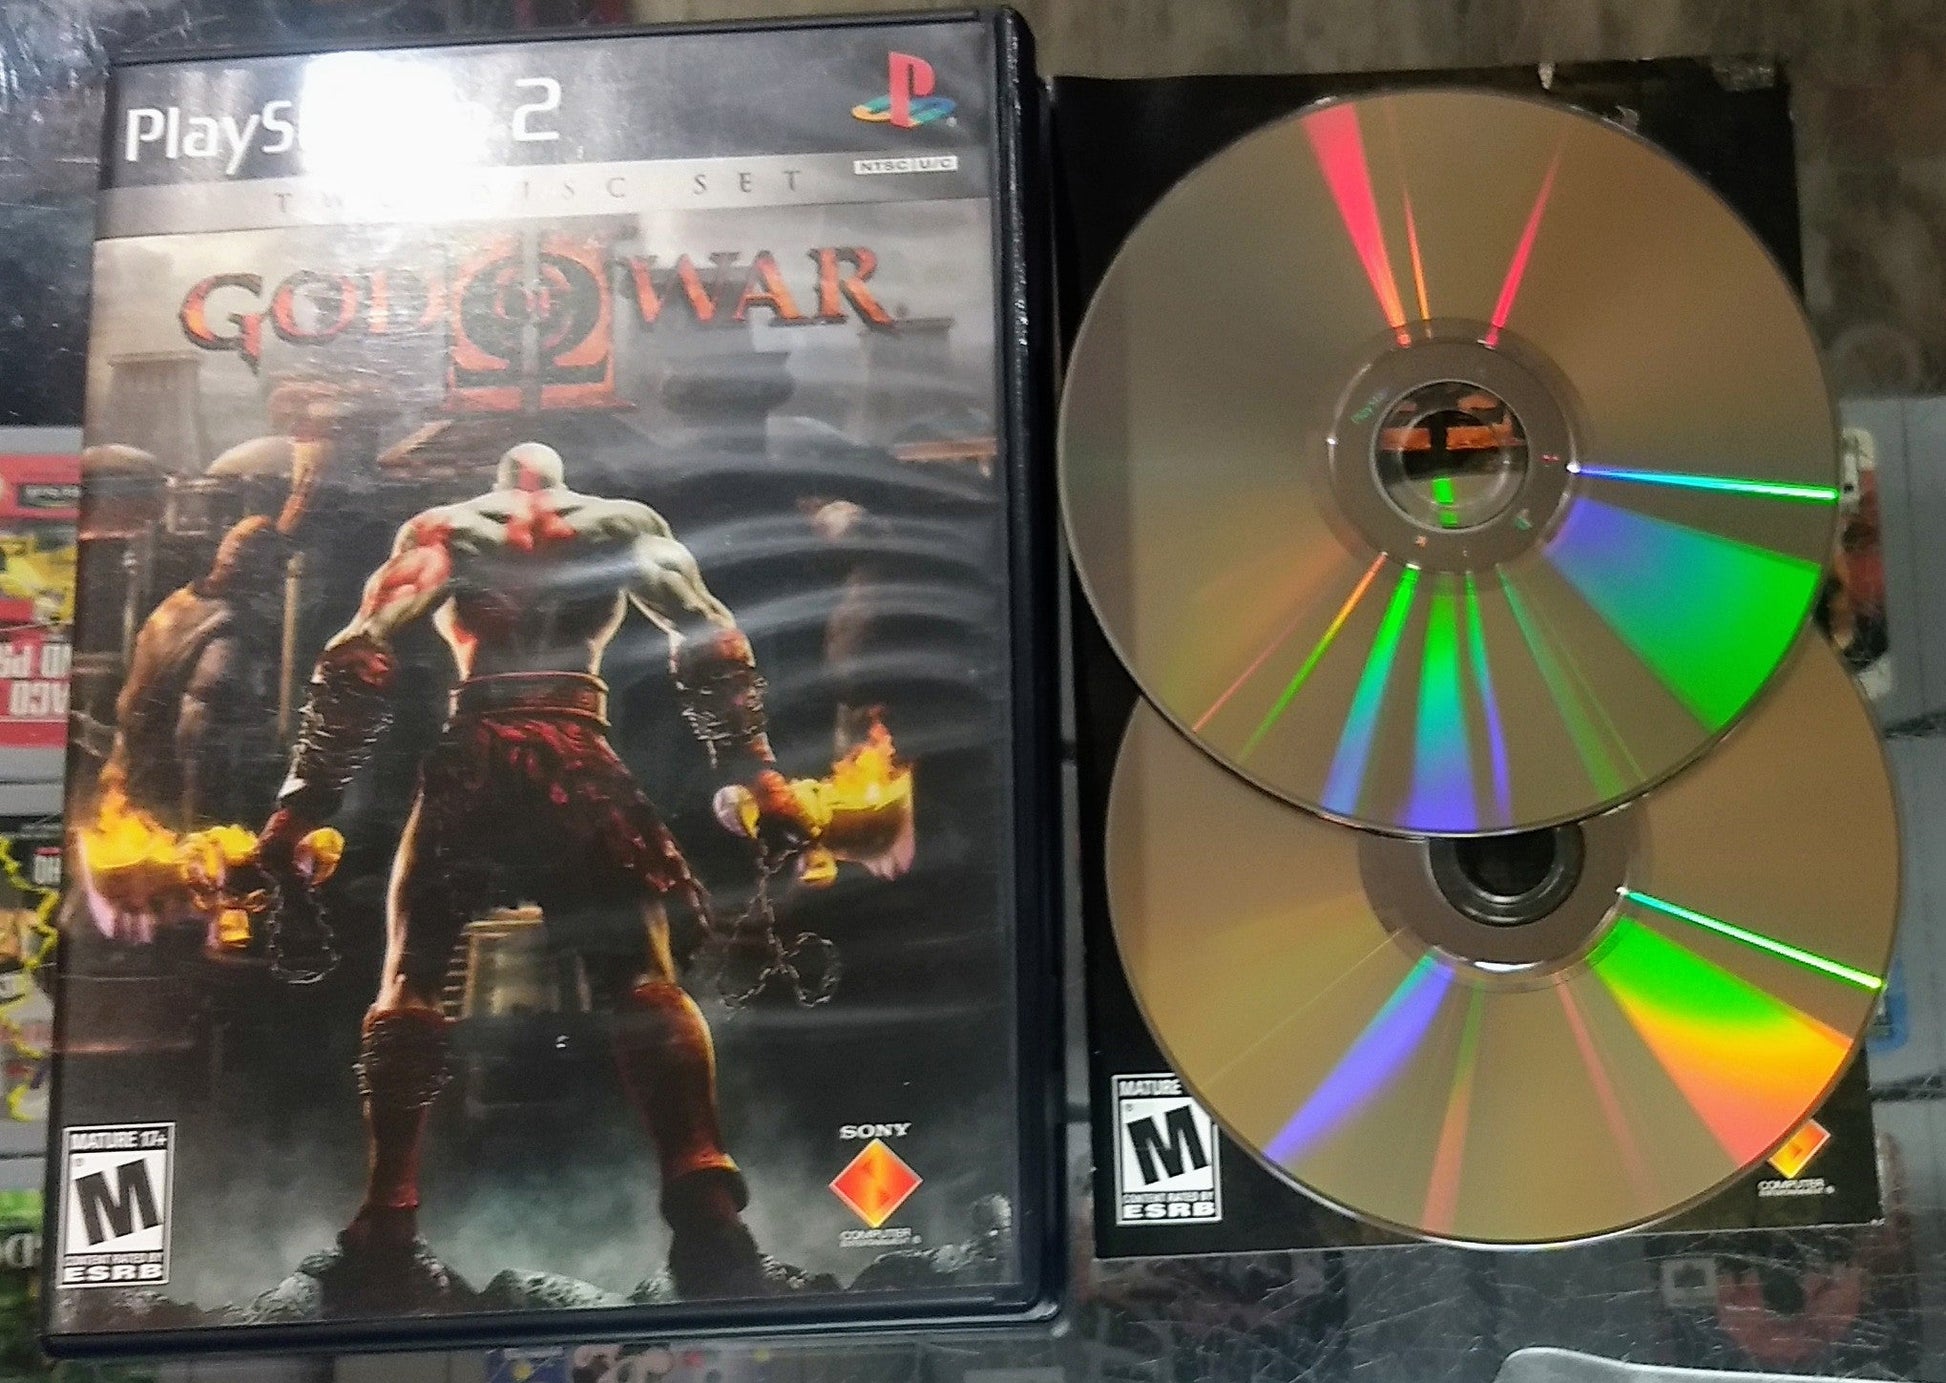 GOD OF WAR II 2  (PLAYSTATION 2 PS2) - jeux video game-x